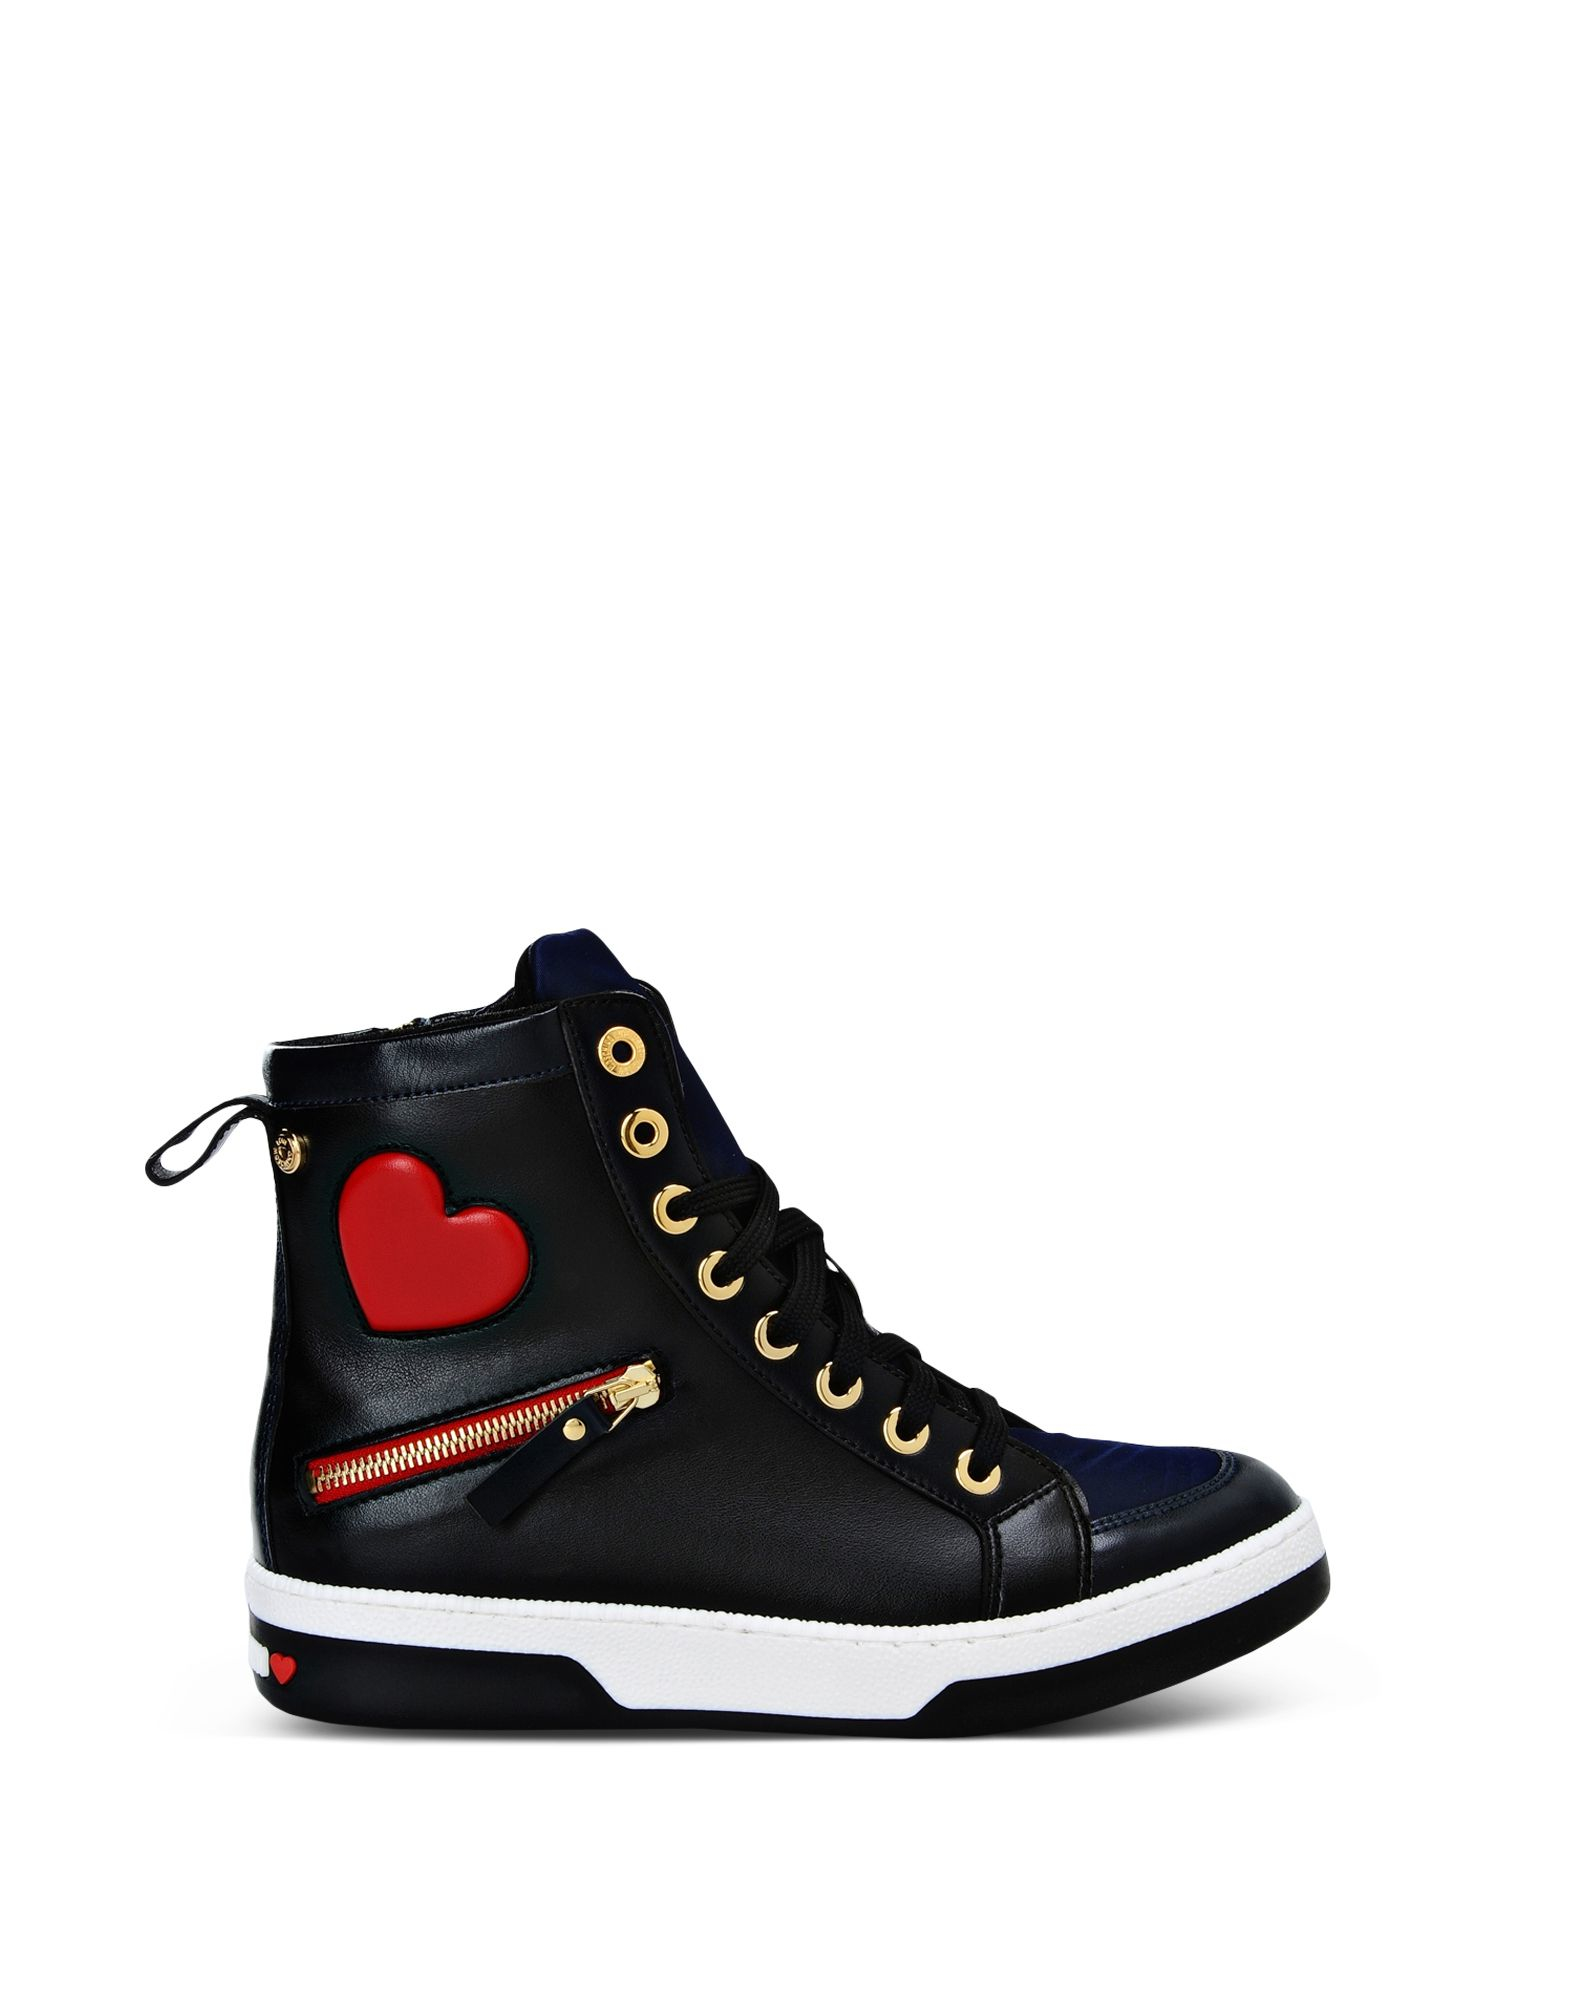 Lyst - Love Moschino Sneakers in Black